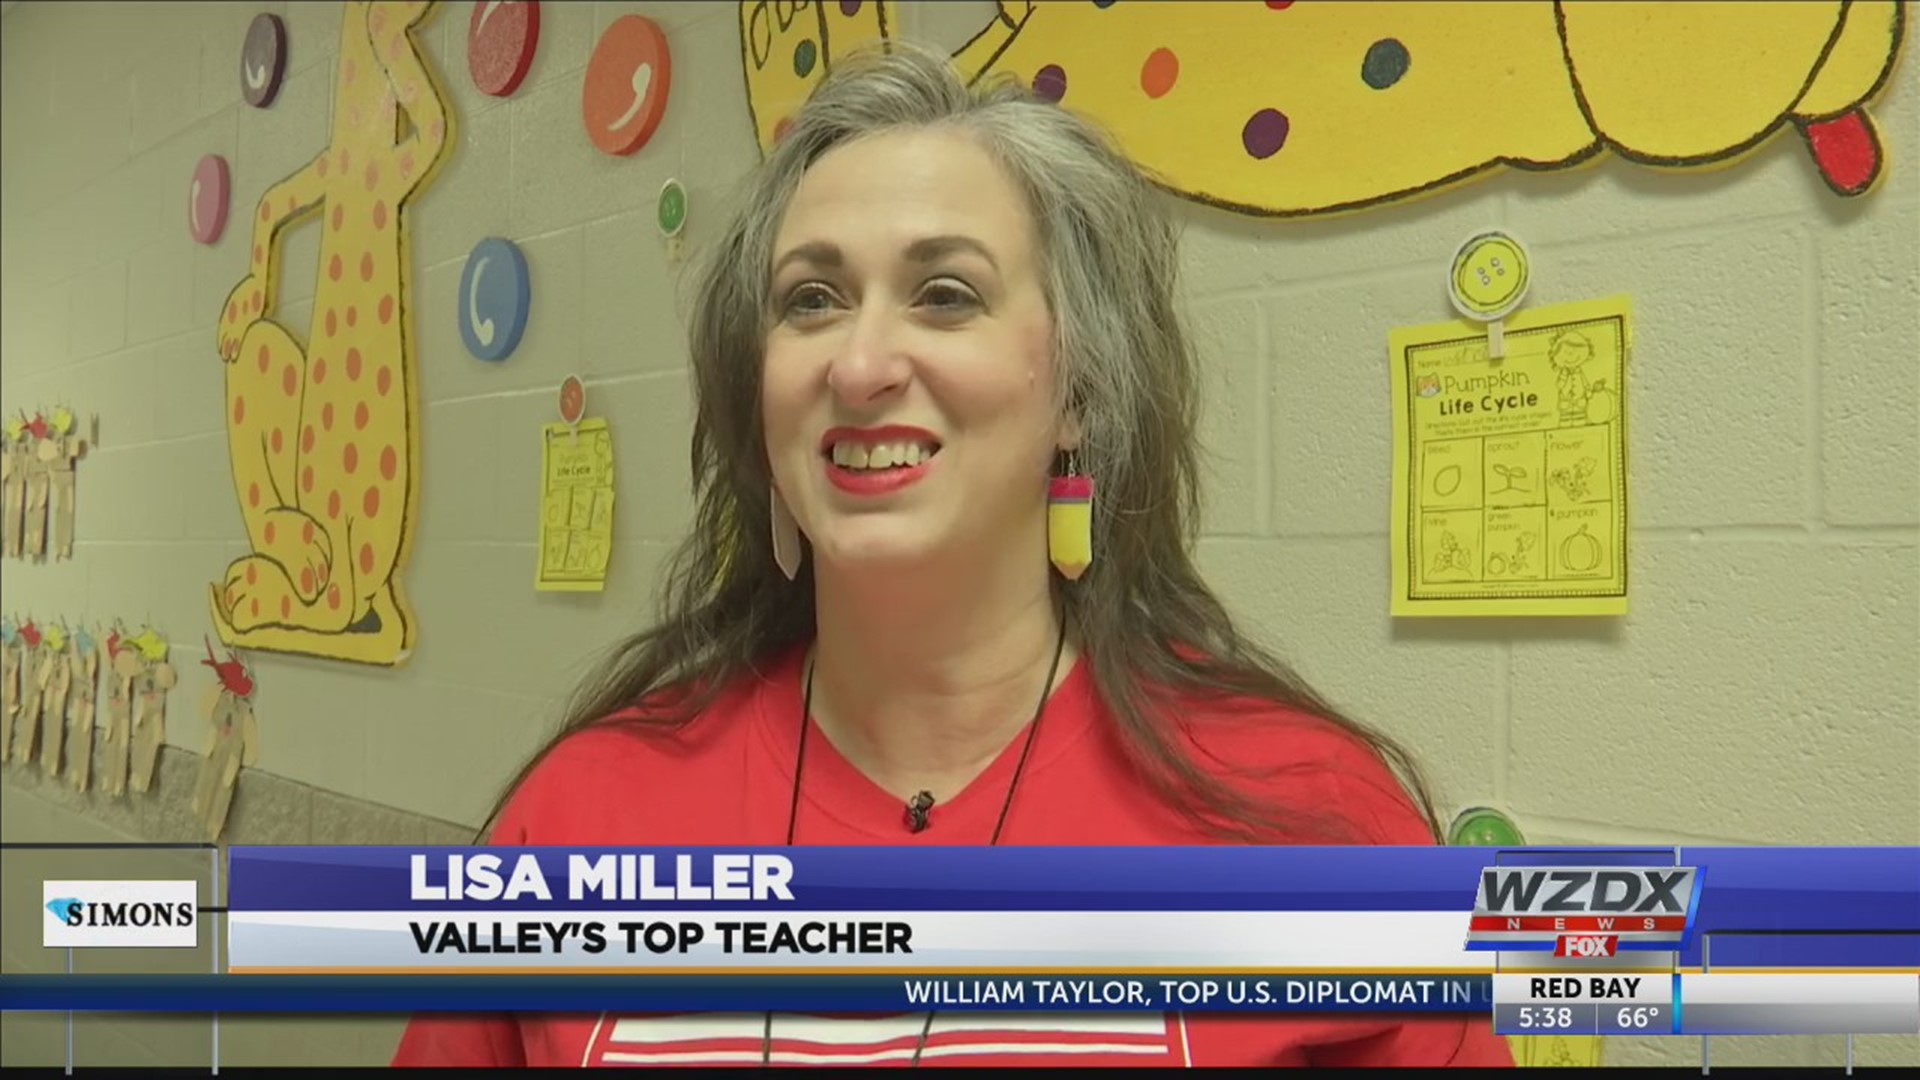 Mrs. Lisa Miller at Hazel Green Elementary was pretty shocked when she found out she was the Valley’s Top Teacher.